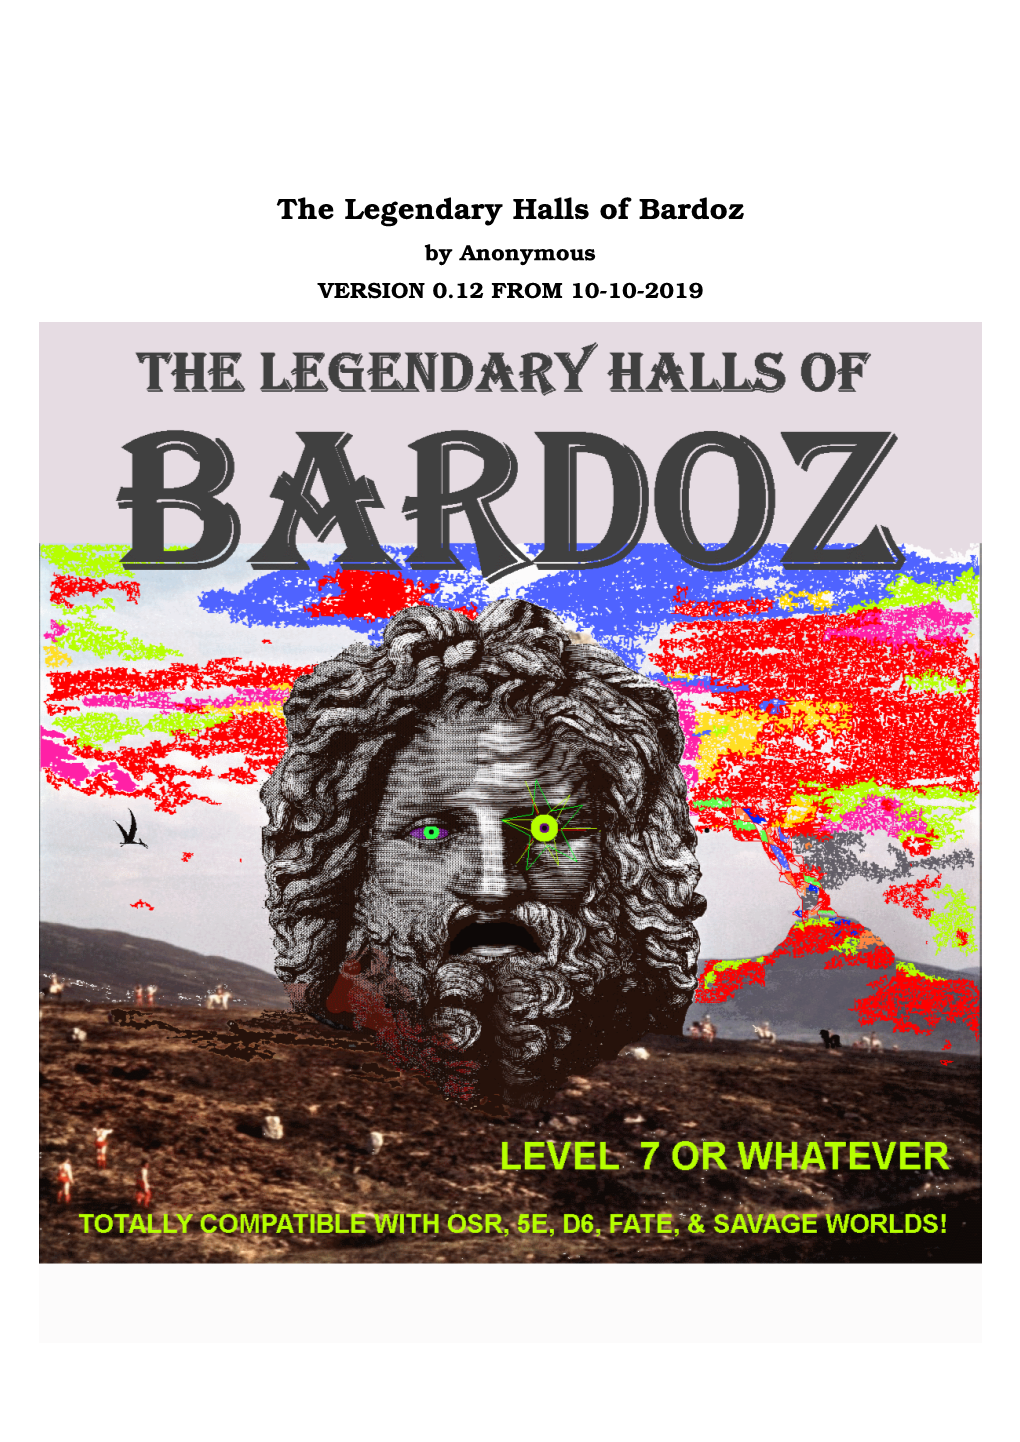 The Legendary Halls of Bardoz by Anonymous VERSION 0.12 from 10-10-2019 the LEGENDARY HALLS of BARDOZ